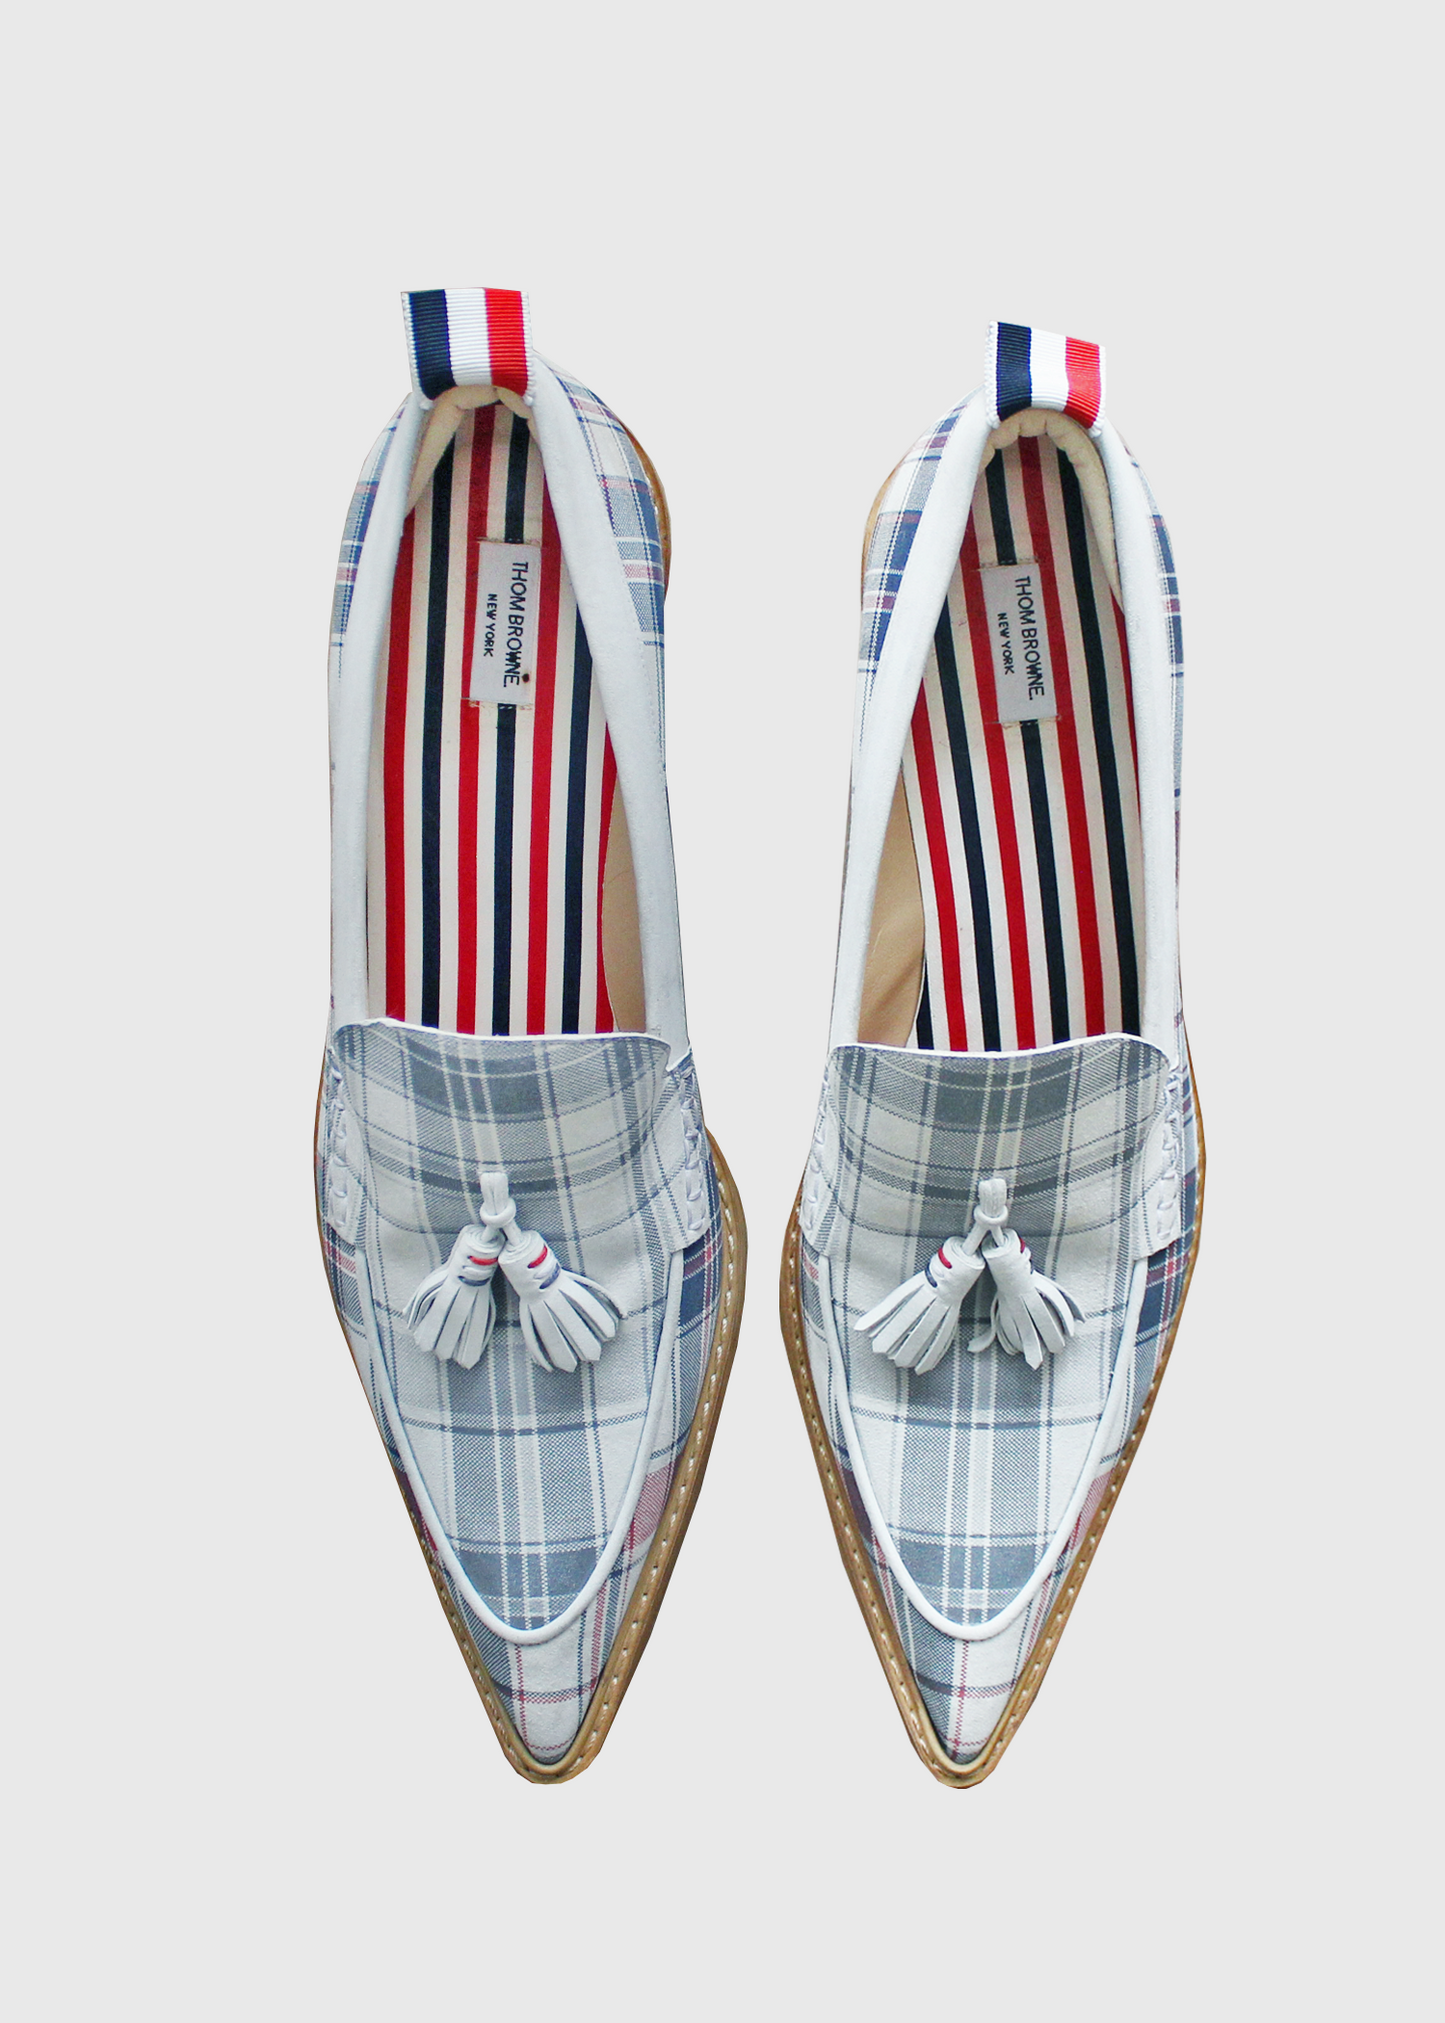 These Thom Browne shoes feature a very pointed toe, tassels, and a stacked, curved wooden kitten heel. Rendered in signature blue and white Thom Browne plaid and a red, white, and blue stripped lining.